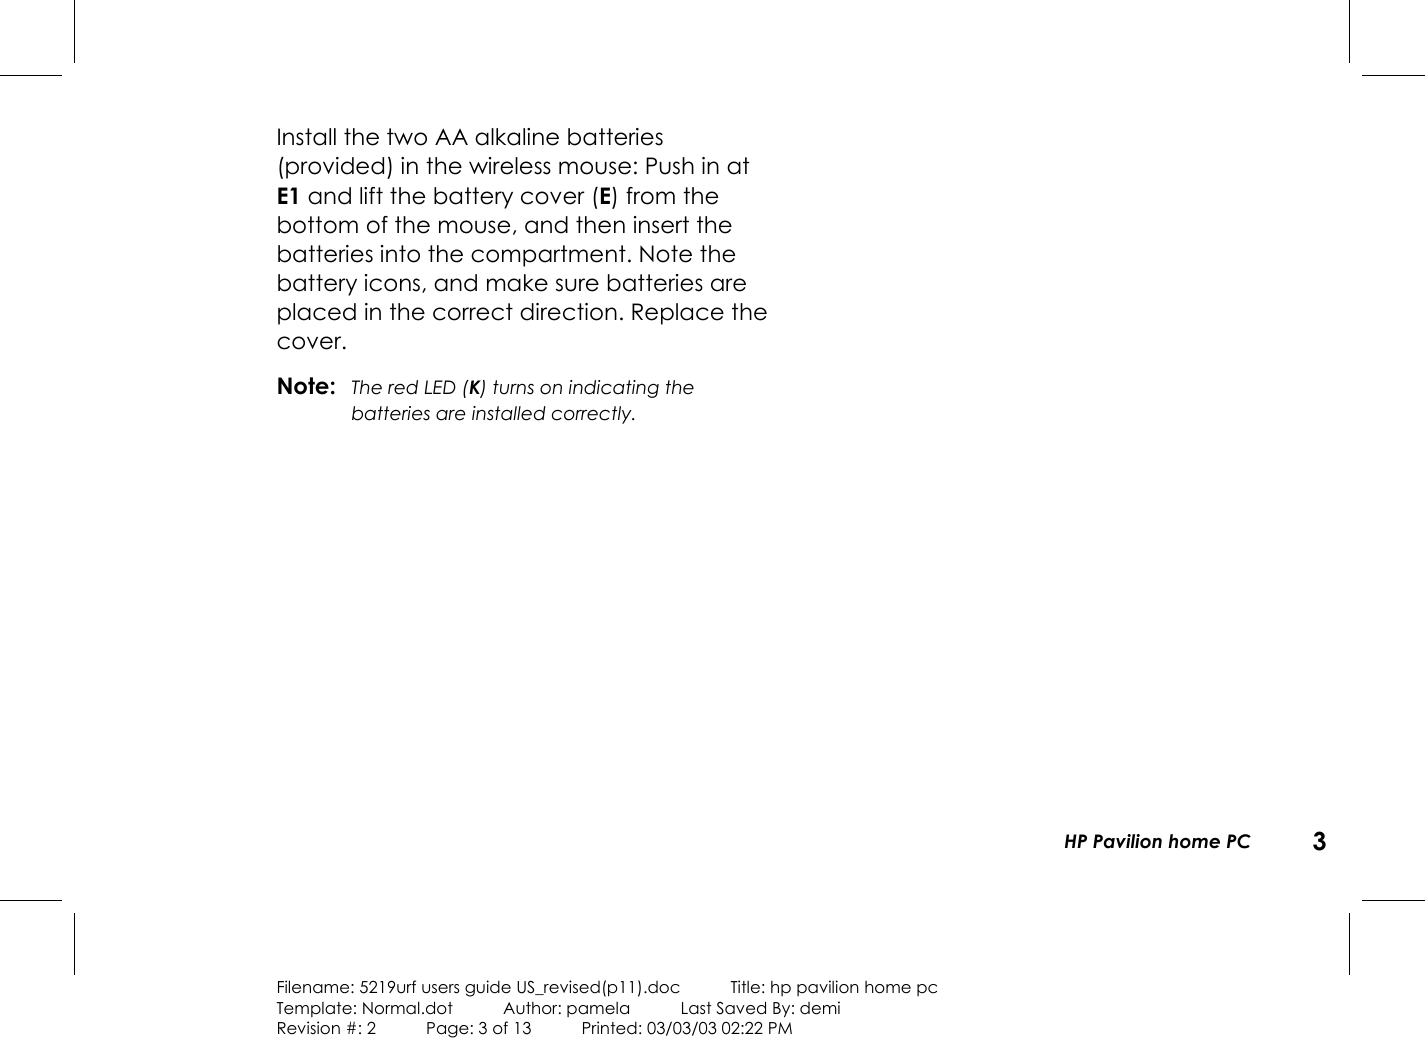 HP Pavilion home PC 3Filename: 5219urf users guide US_revised(p11).doc            Title: hp pavilion home pcTemplate: Normal.dot      Author: pamela      Last Saved By: demiRevision #: 2      Page: 3 of 13      Printed: 03/03/03 02:22 PMInstall the two AA alkaline batteries(provided) inthe wireless mouse: Push in atE1 and lift thebattery cover (E) from thebottom of the mouse, and then insert thebatteries into the compartment. Note thebattery icons, and make sure batteries areplaced in the correct direction. Replace thecover.Note: The red LED (K) turns on indicating thebatteries are installed correctly.